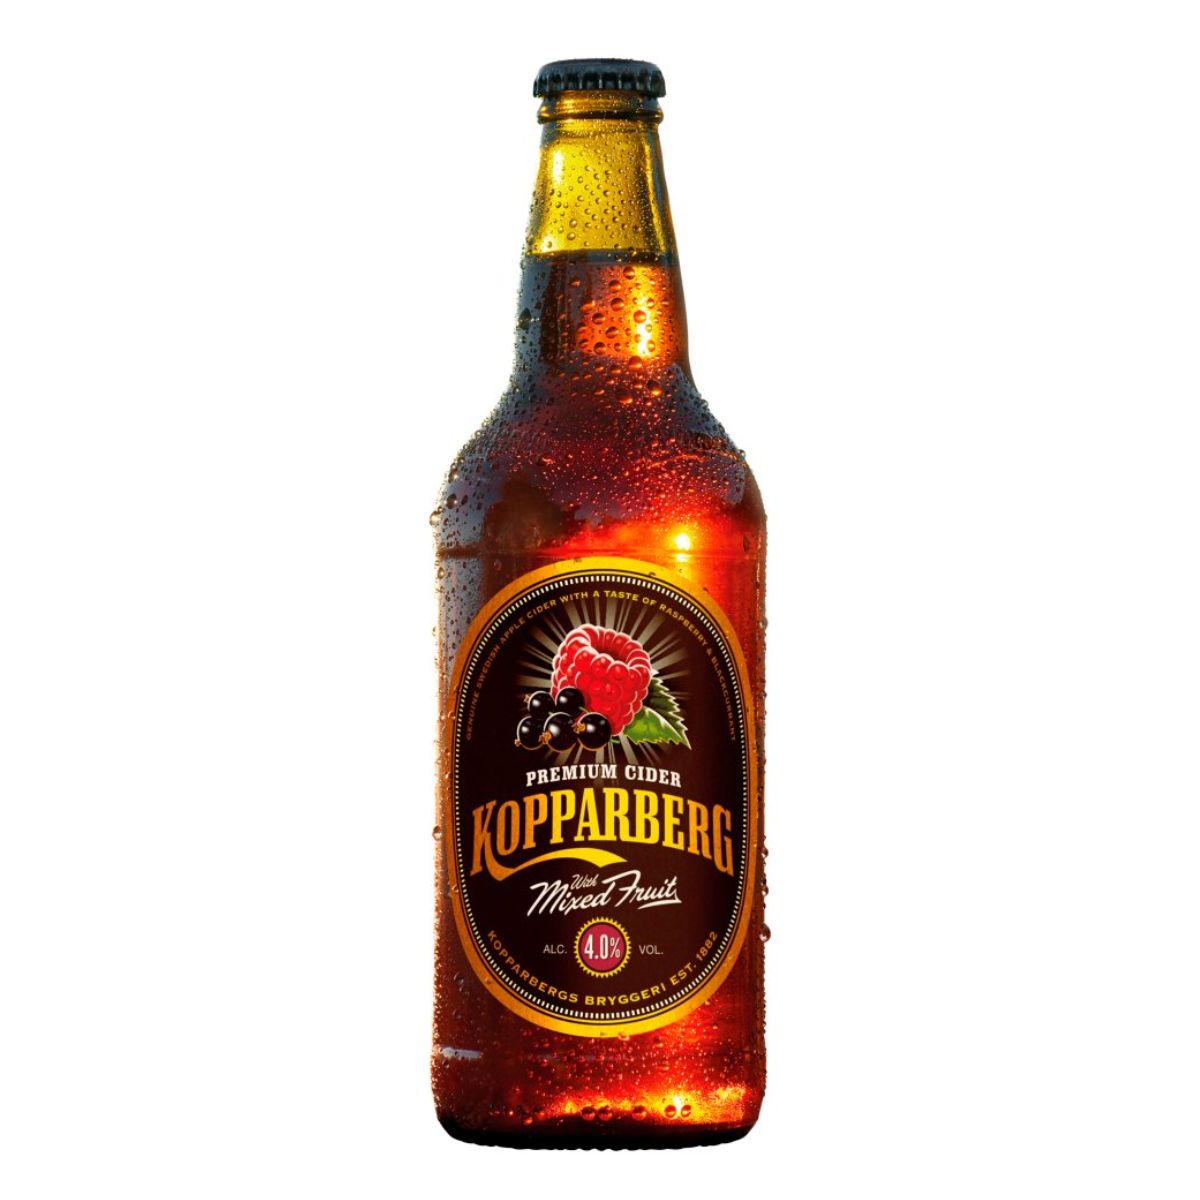 A bottle of Kopparberg - Premium Cider with Mixed Fruit (4.0% ABV) - 500ml on a white background.